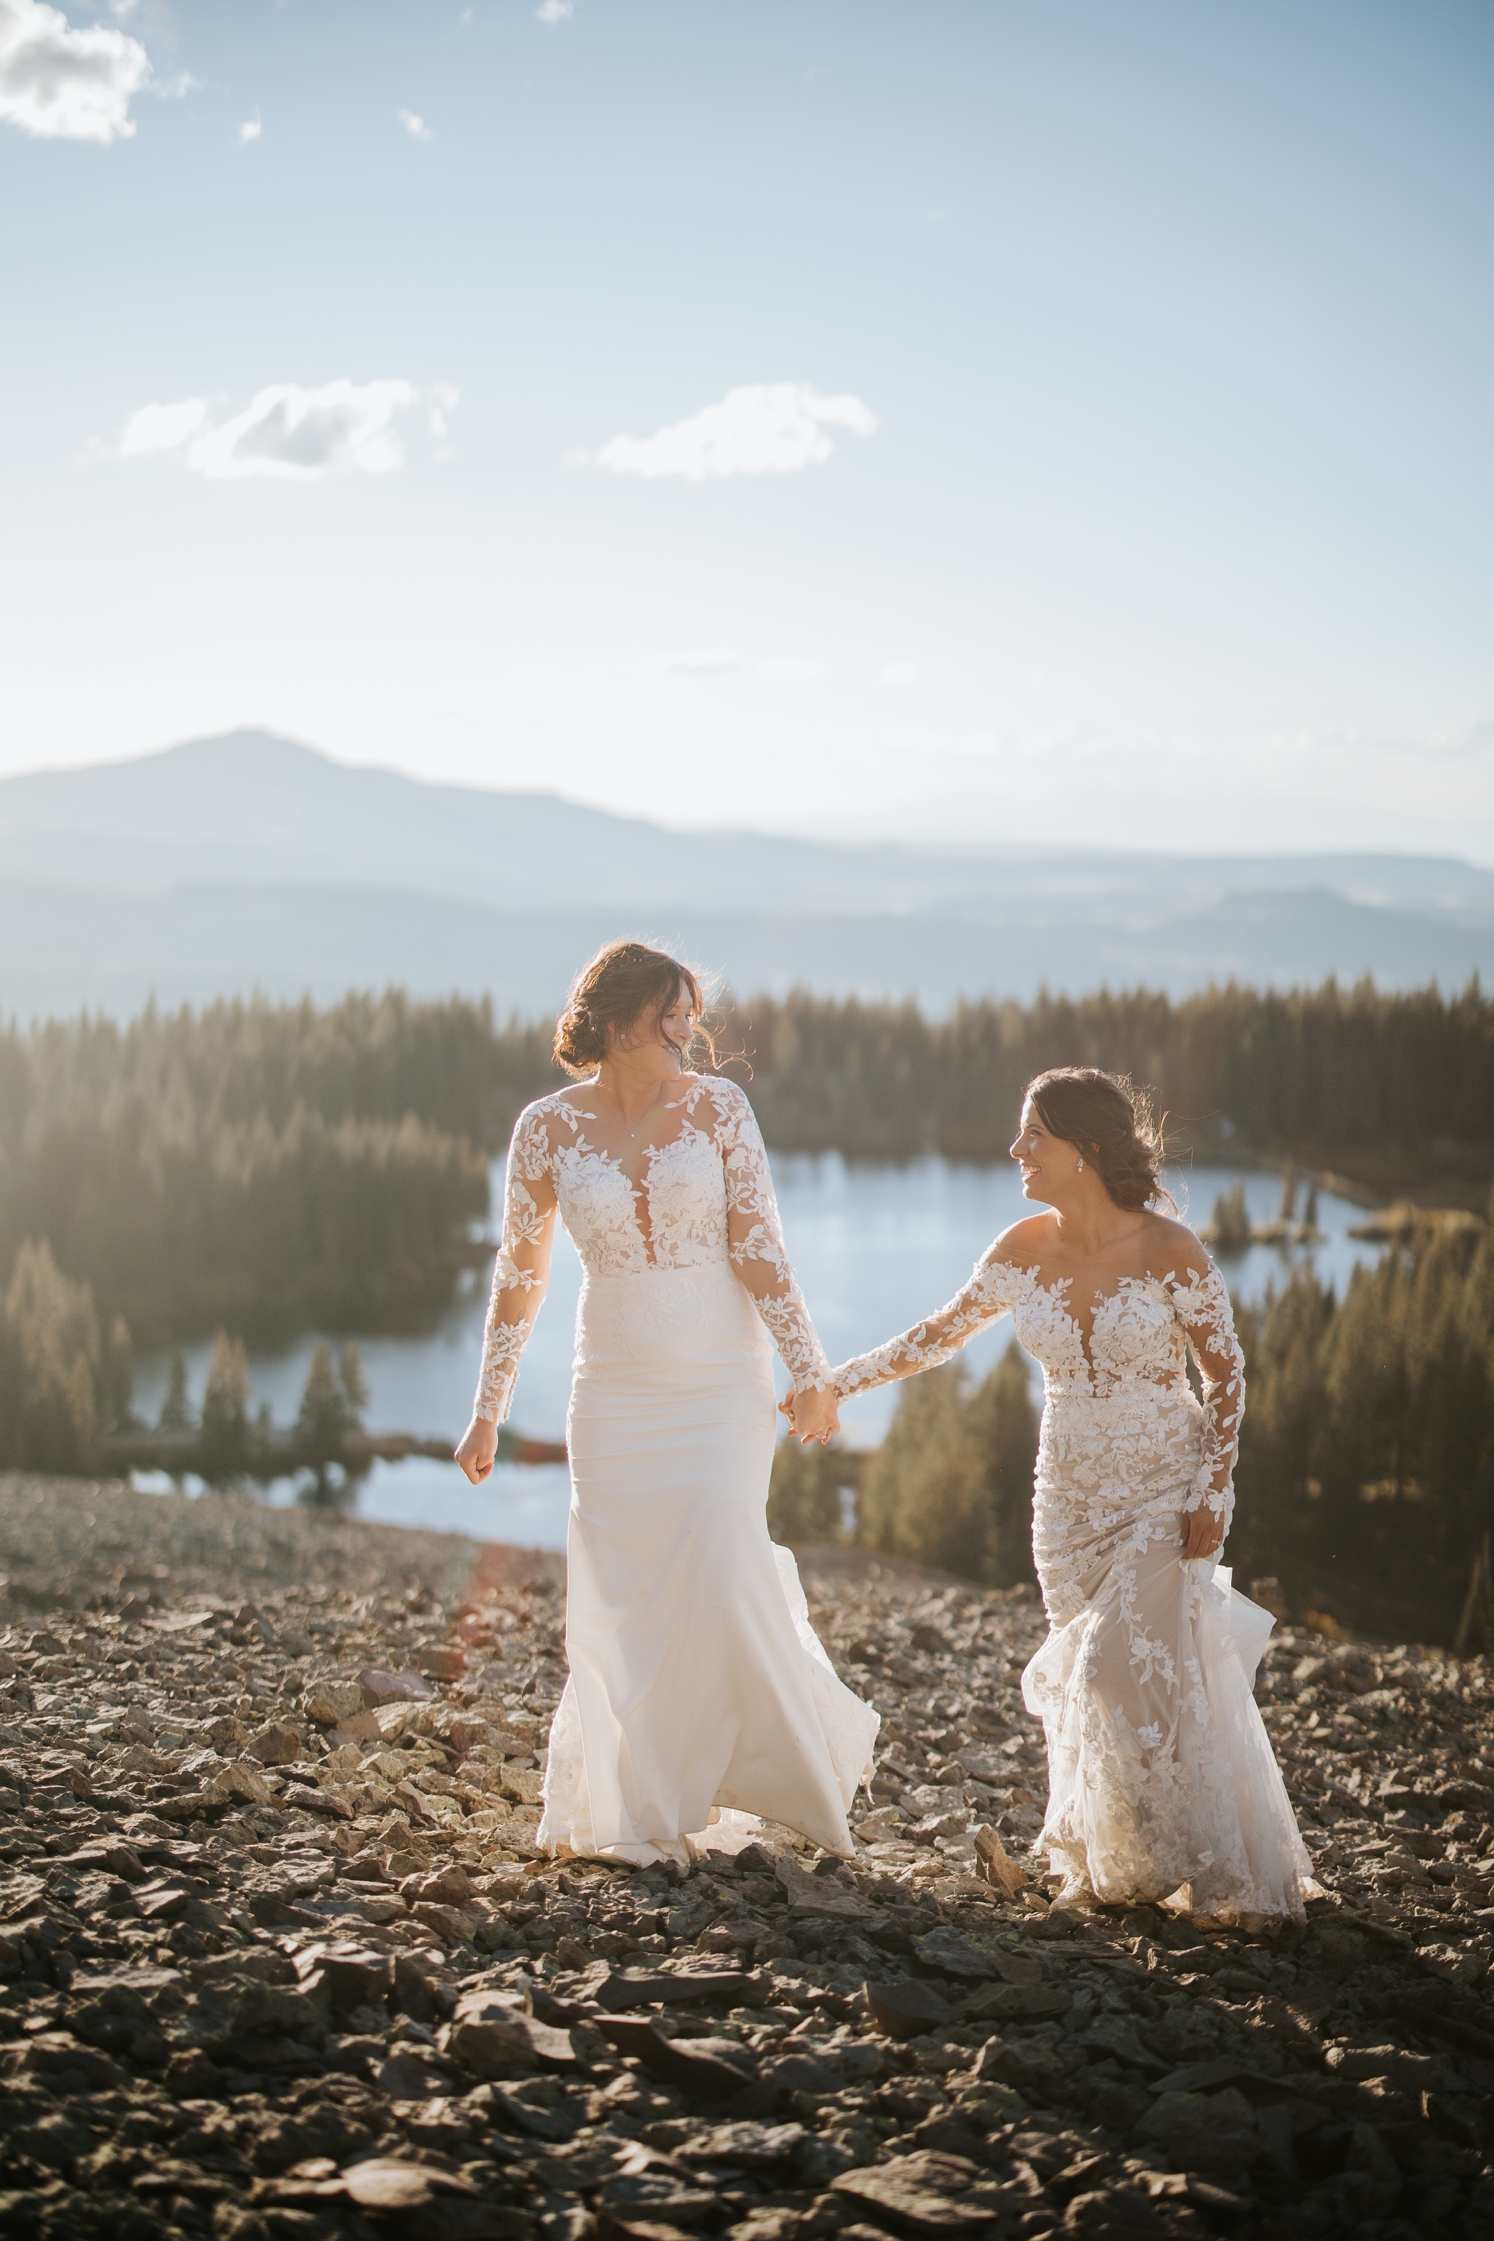 Brides holding hands and walking up mountain at Telluride wedding | McArthur Weddings and Events